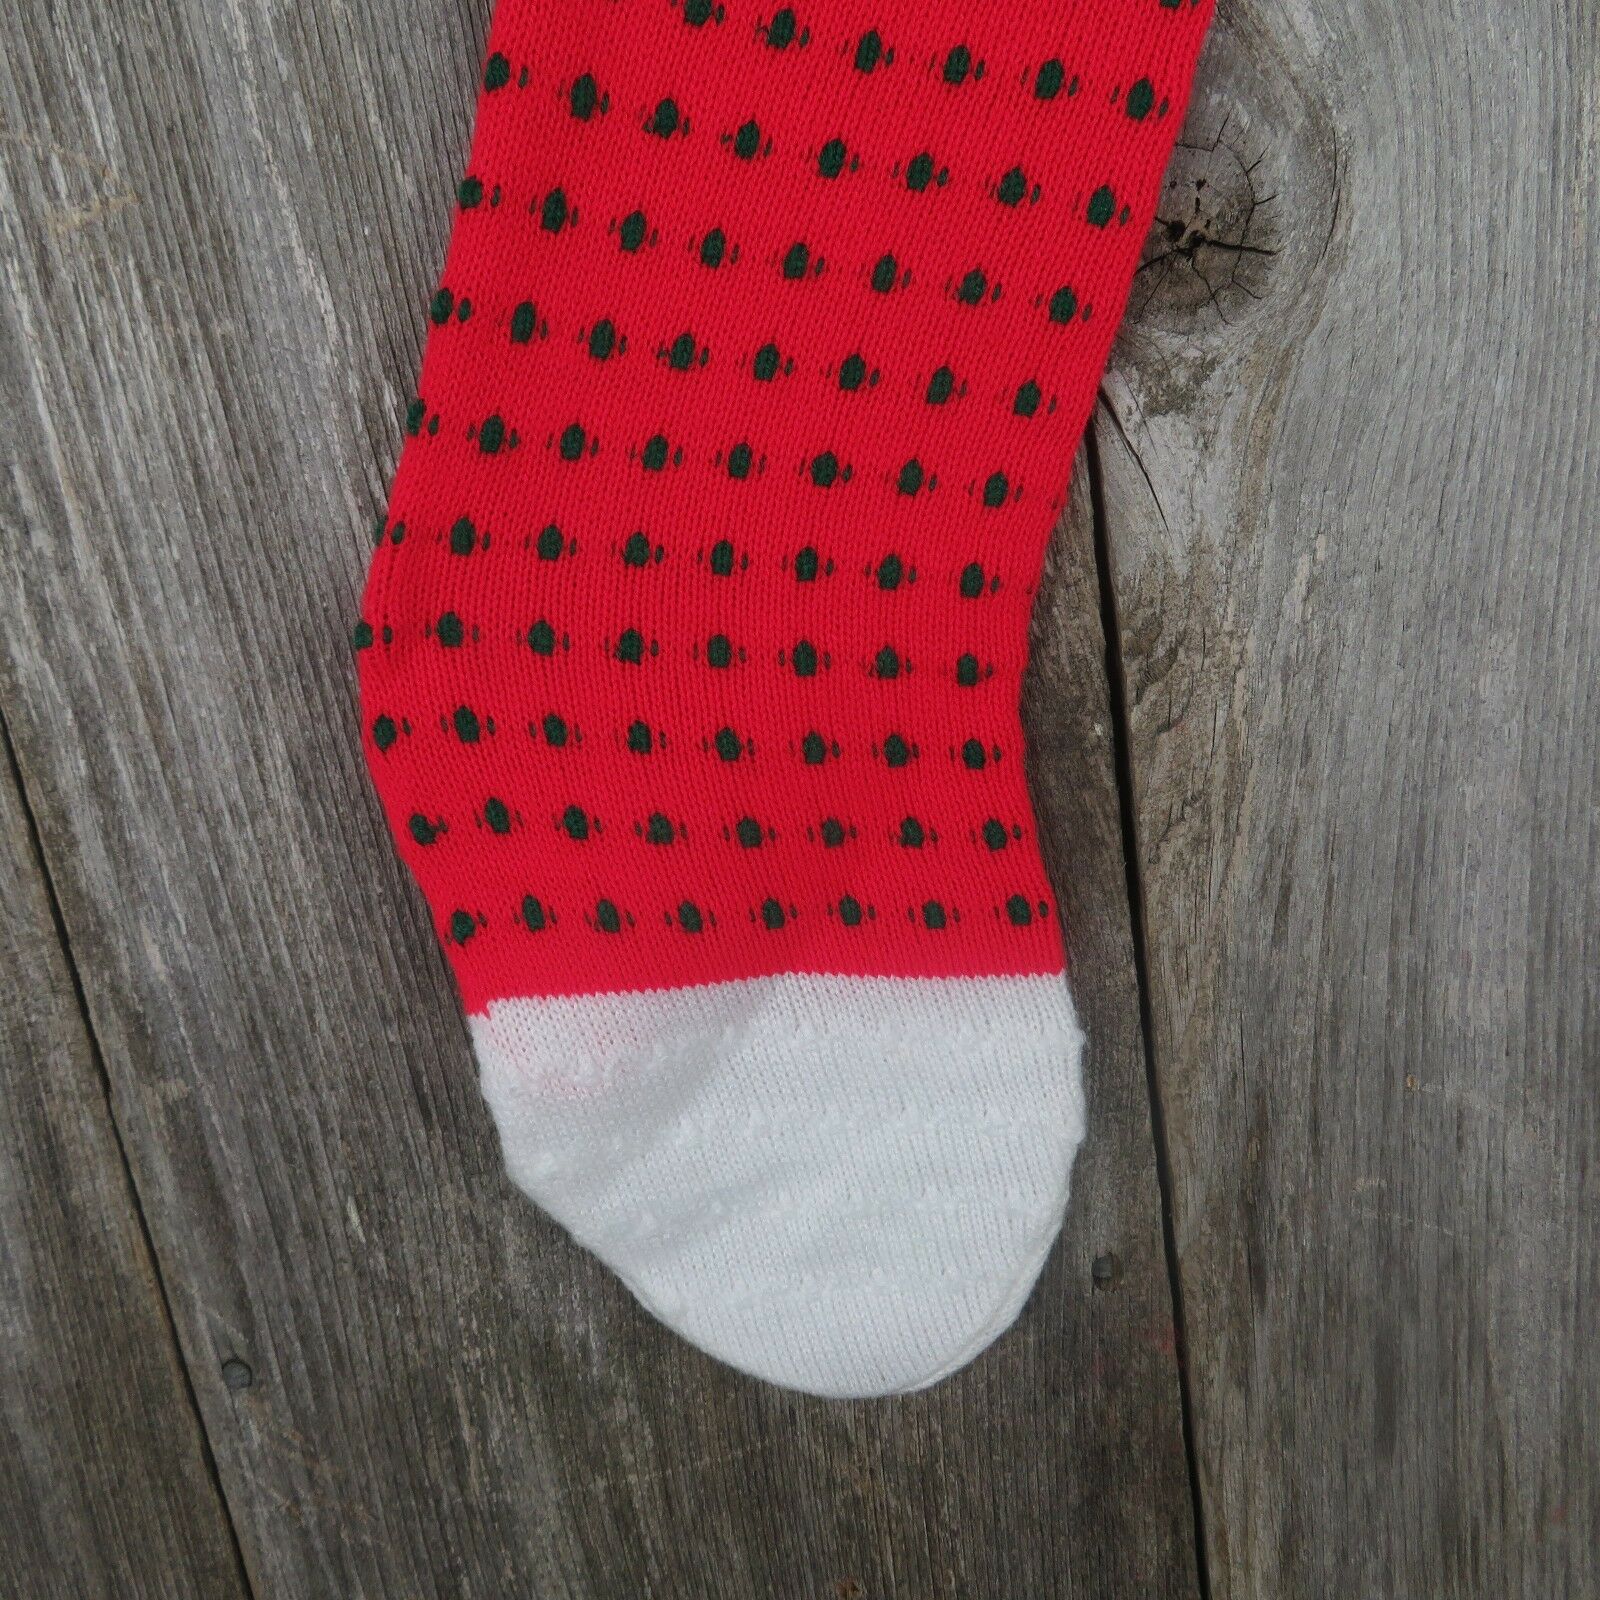 Christmas Stocking Knitted Knit Tis the Season Vintage 1980s Red Green White st6 - At Grandma's Table